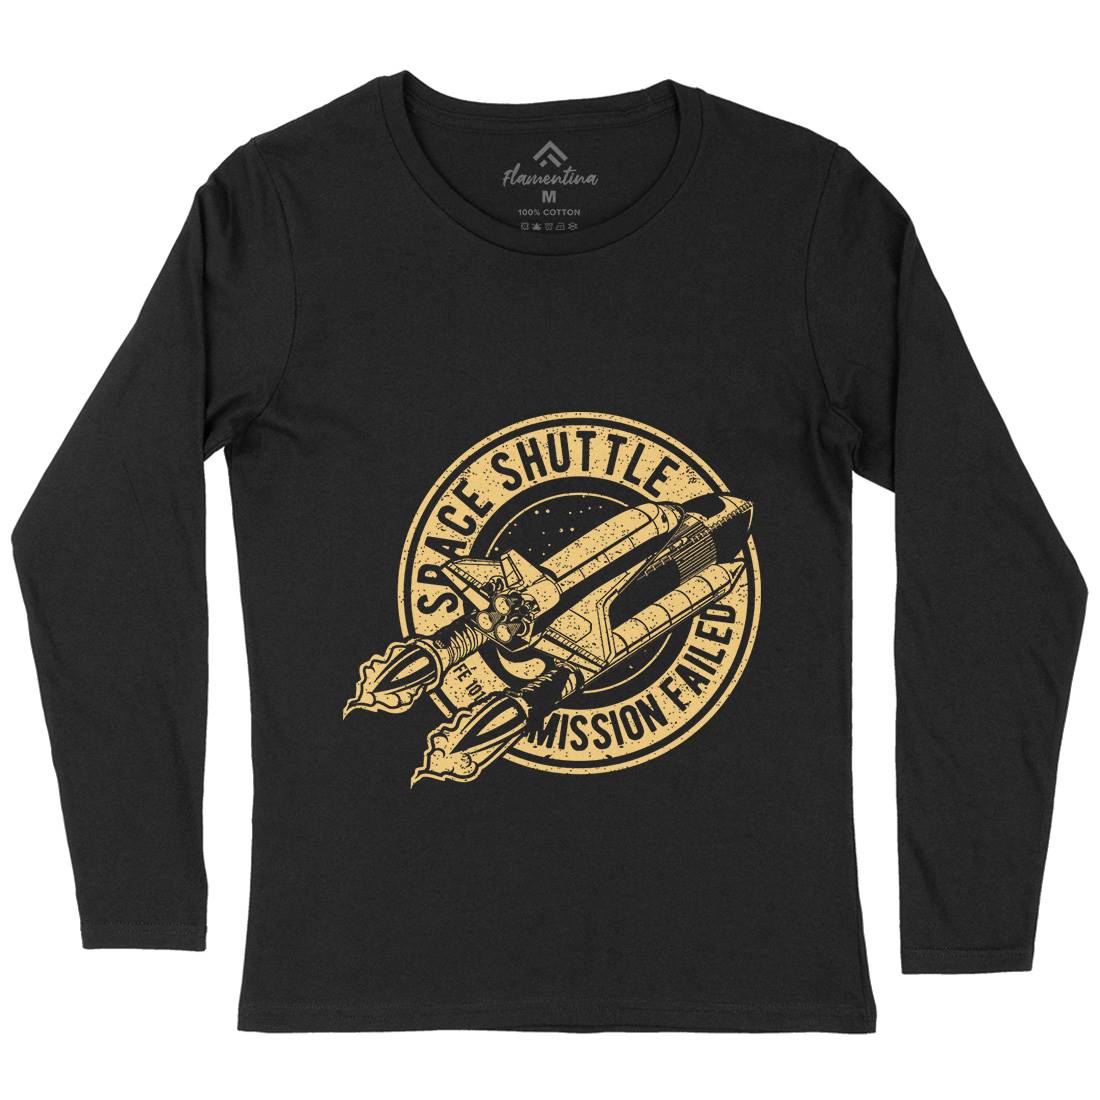 Mission Failed Womens Long Sleeve T-Shirt Space A713